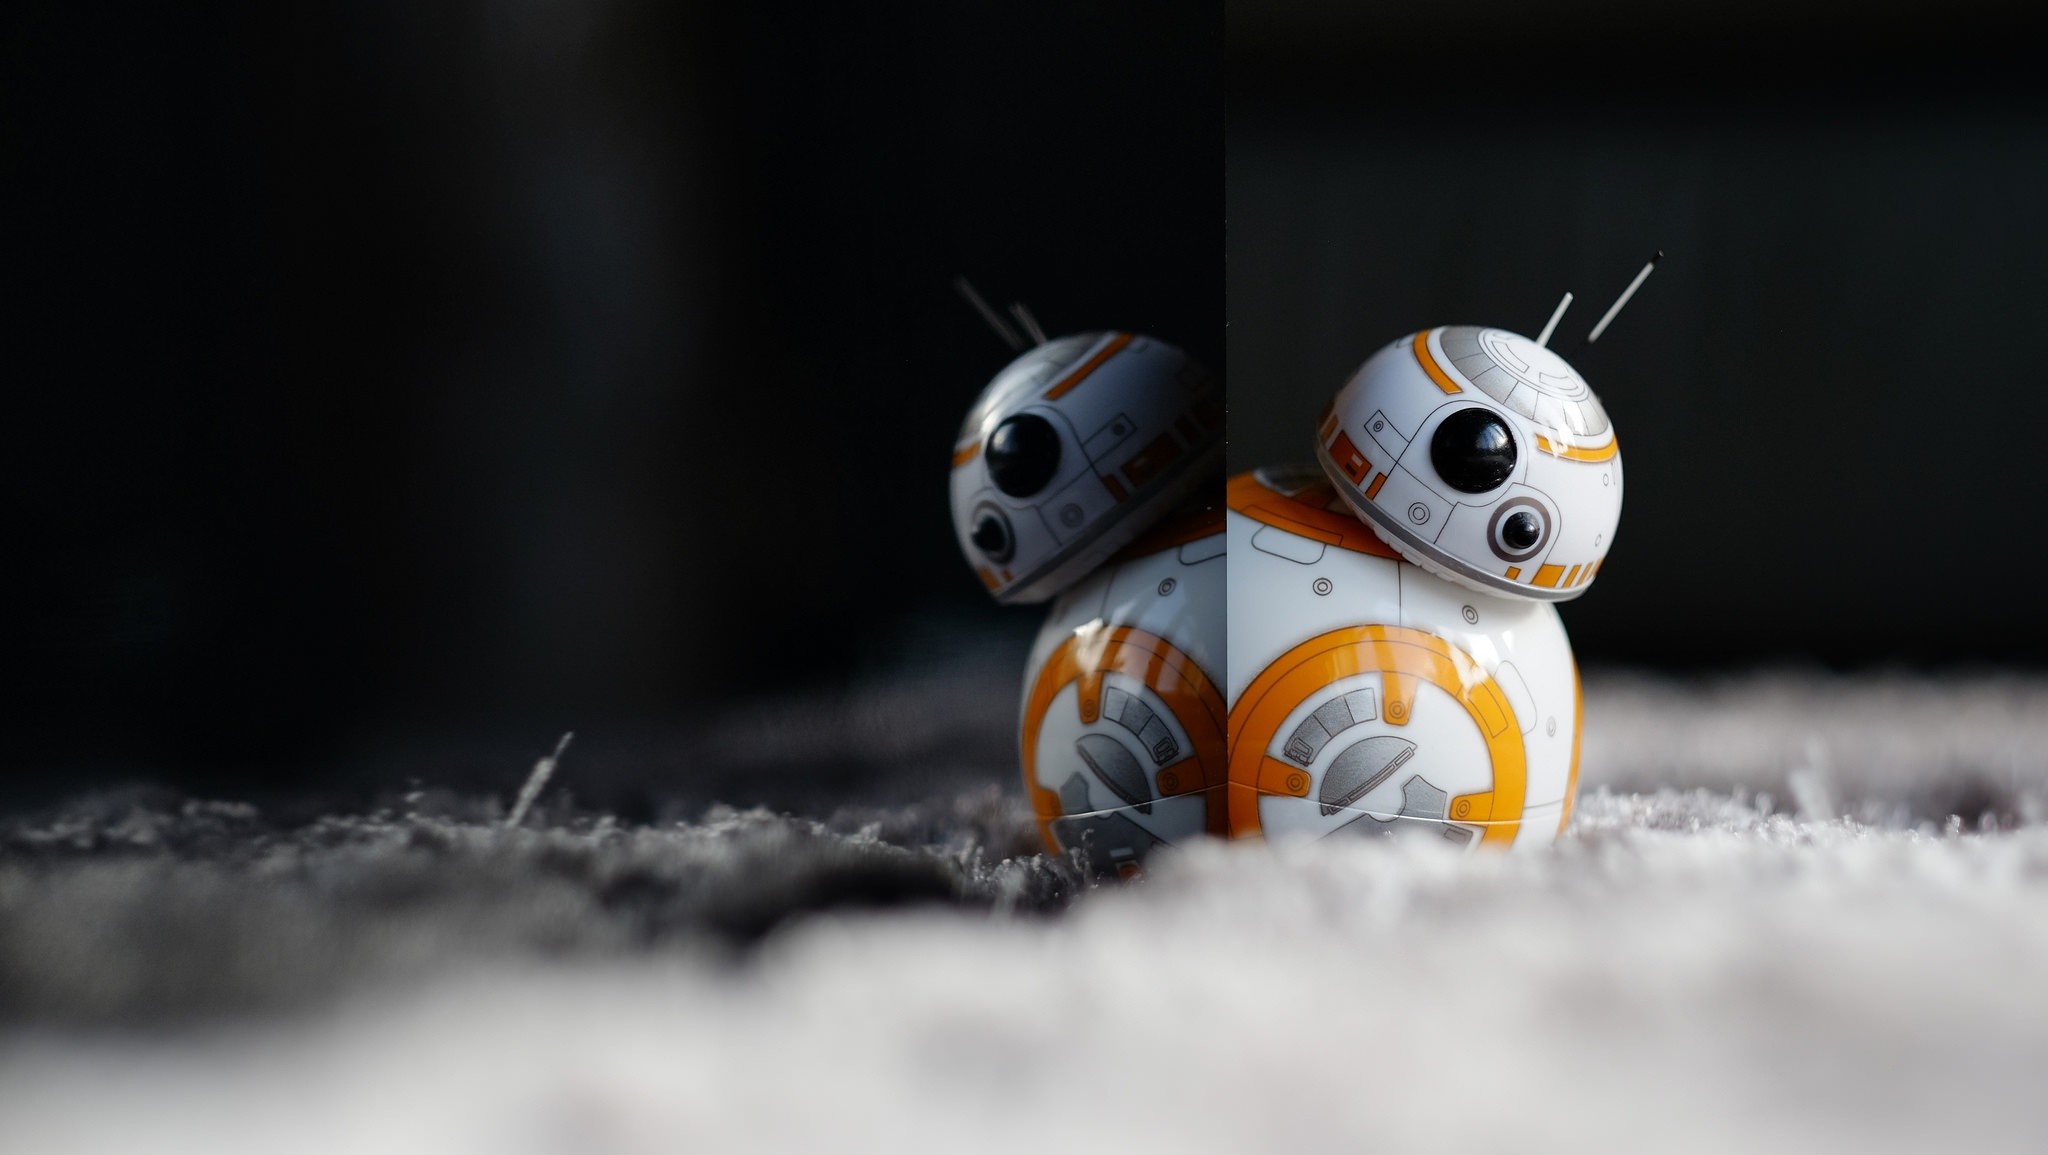 2048x1155 Man Made - Toy Reflection Star Wars BB-8 Droid Wallpaper